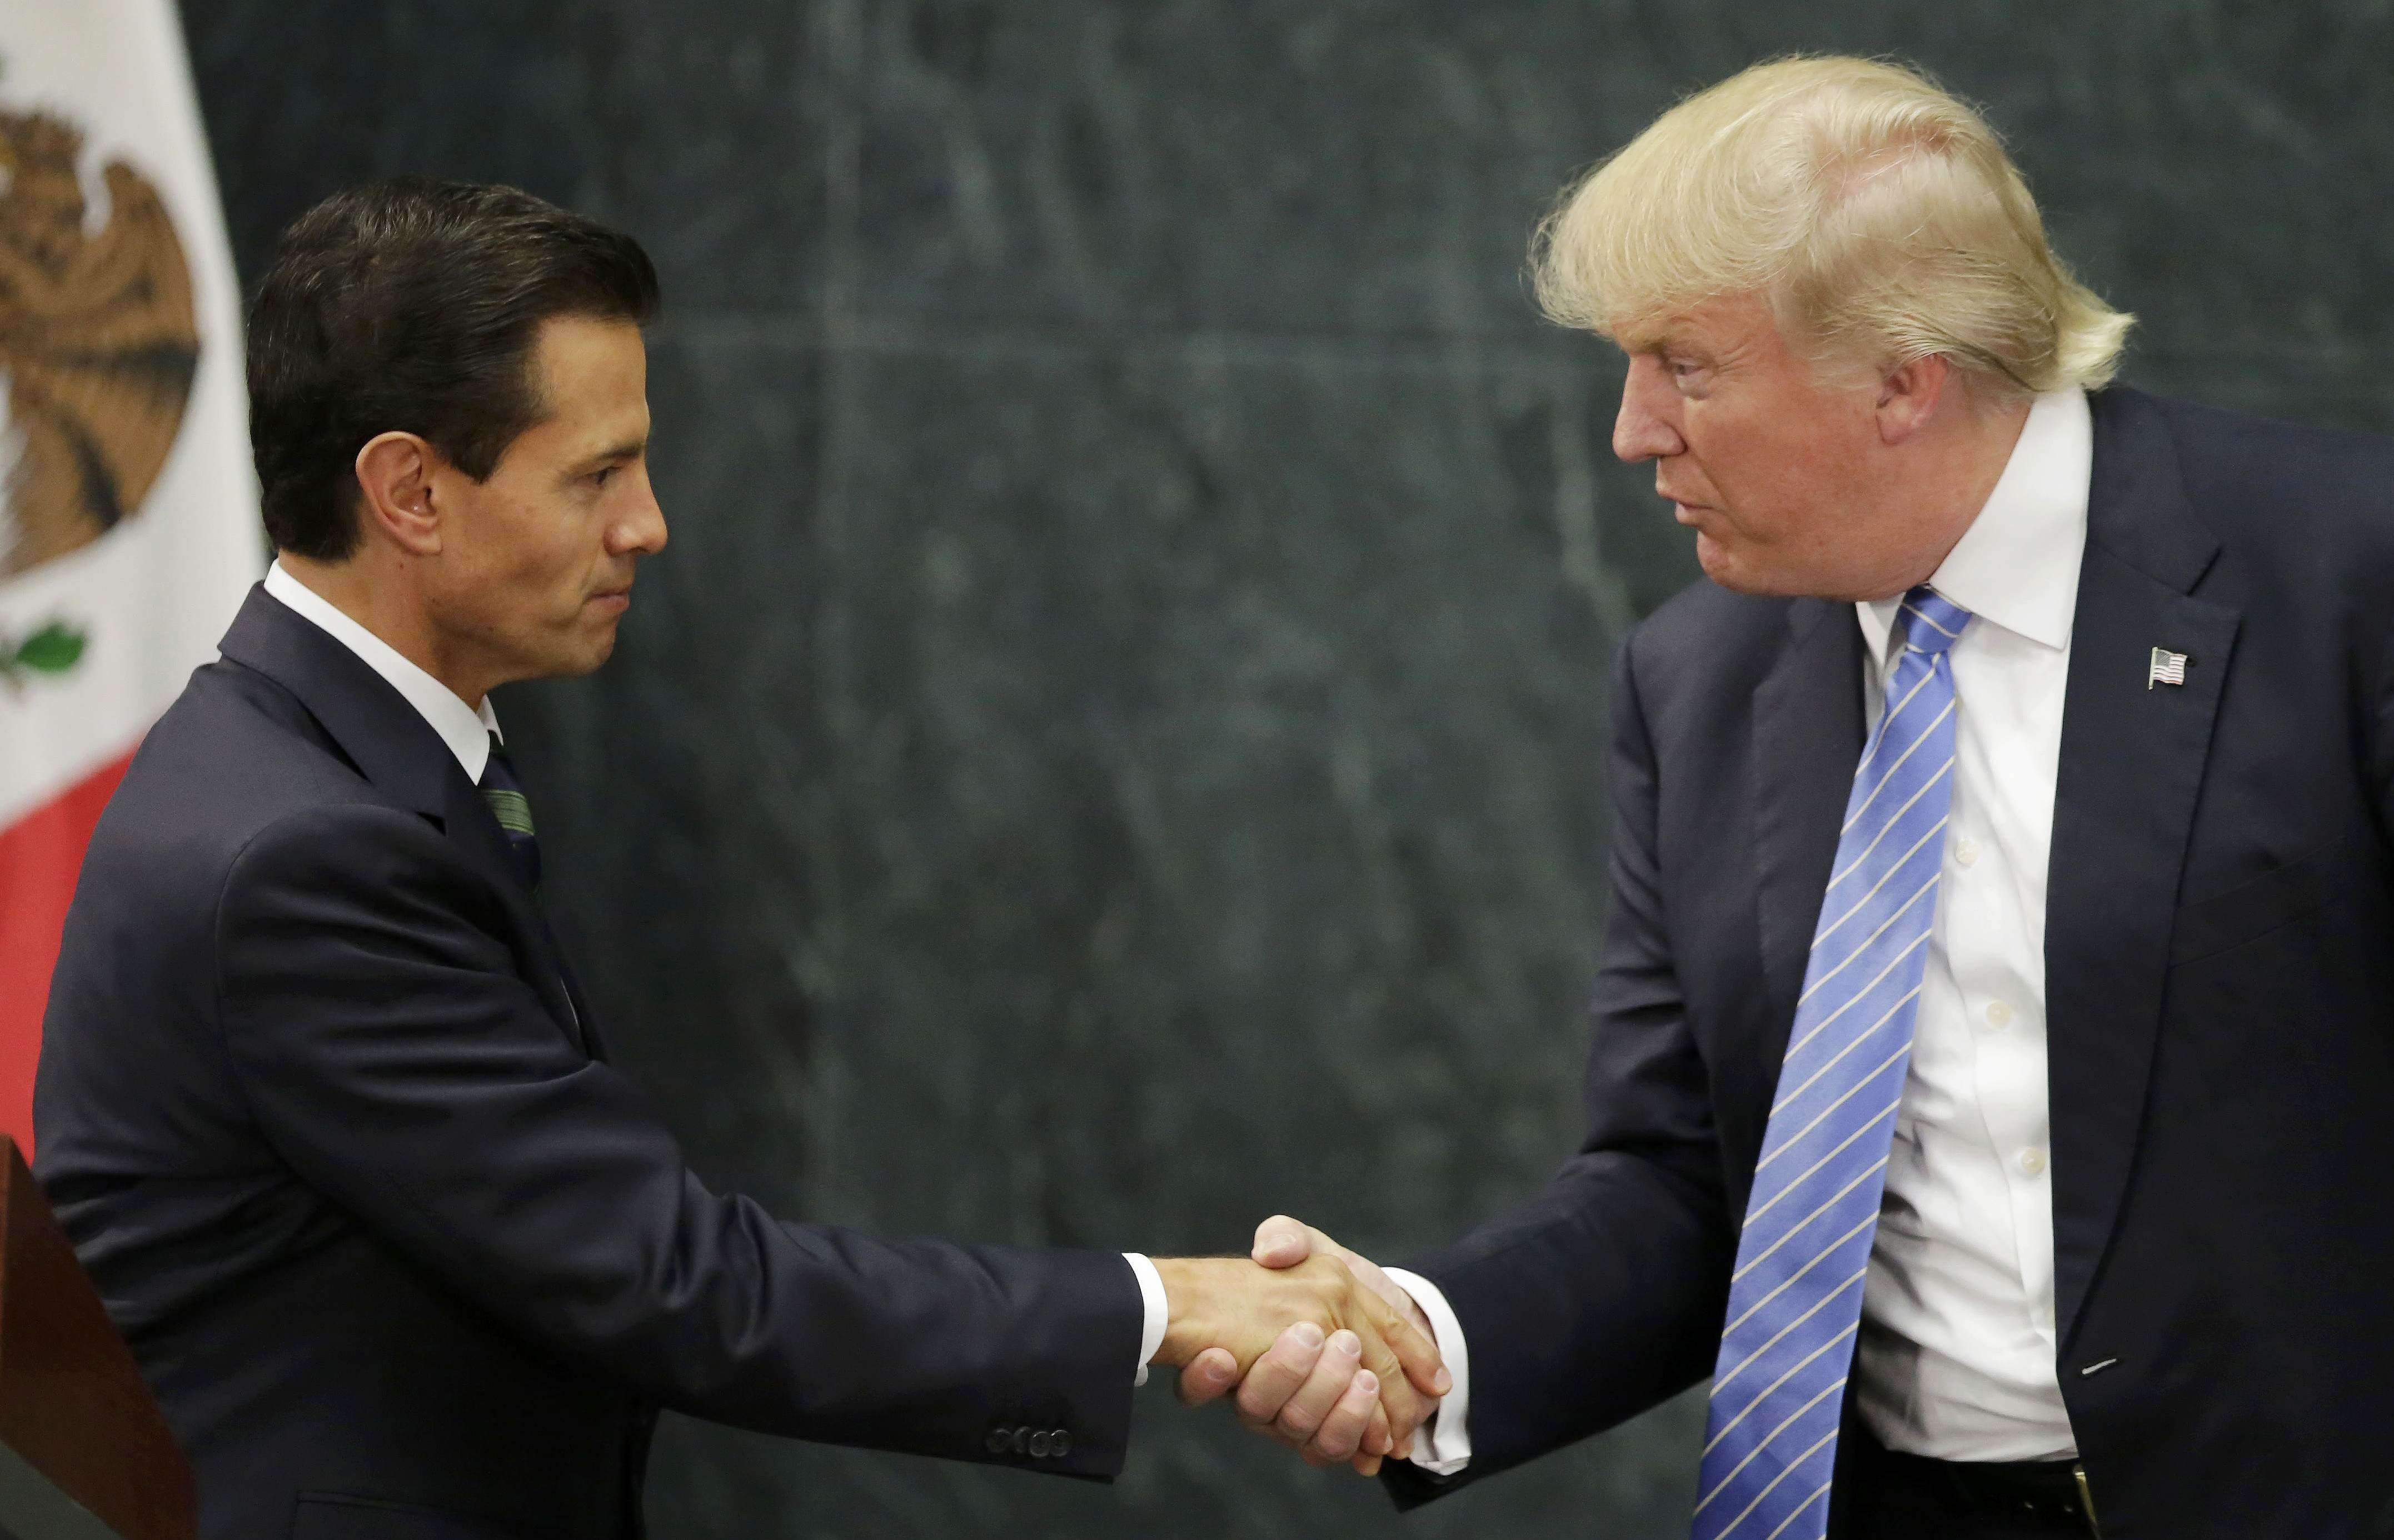 Mexico president blasts Trump's policies as 'huge threat' after meeting